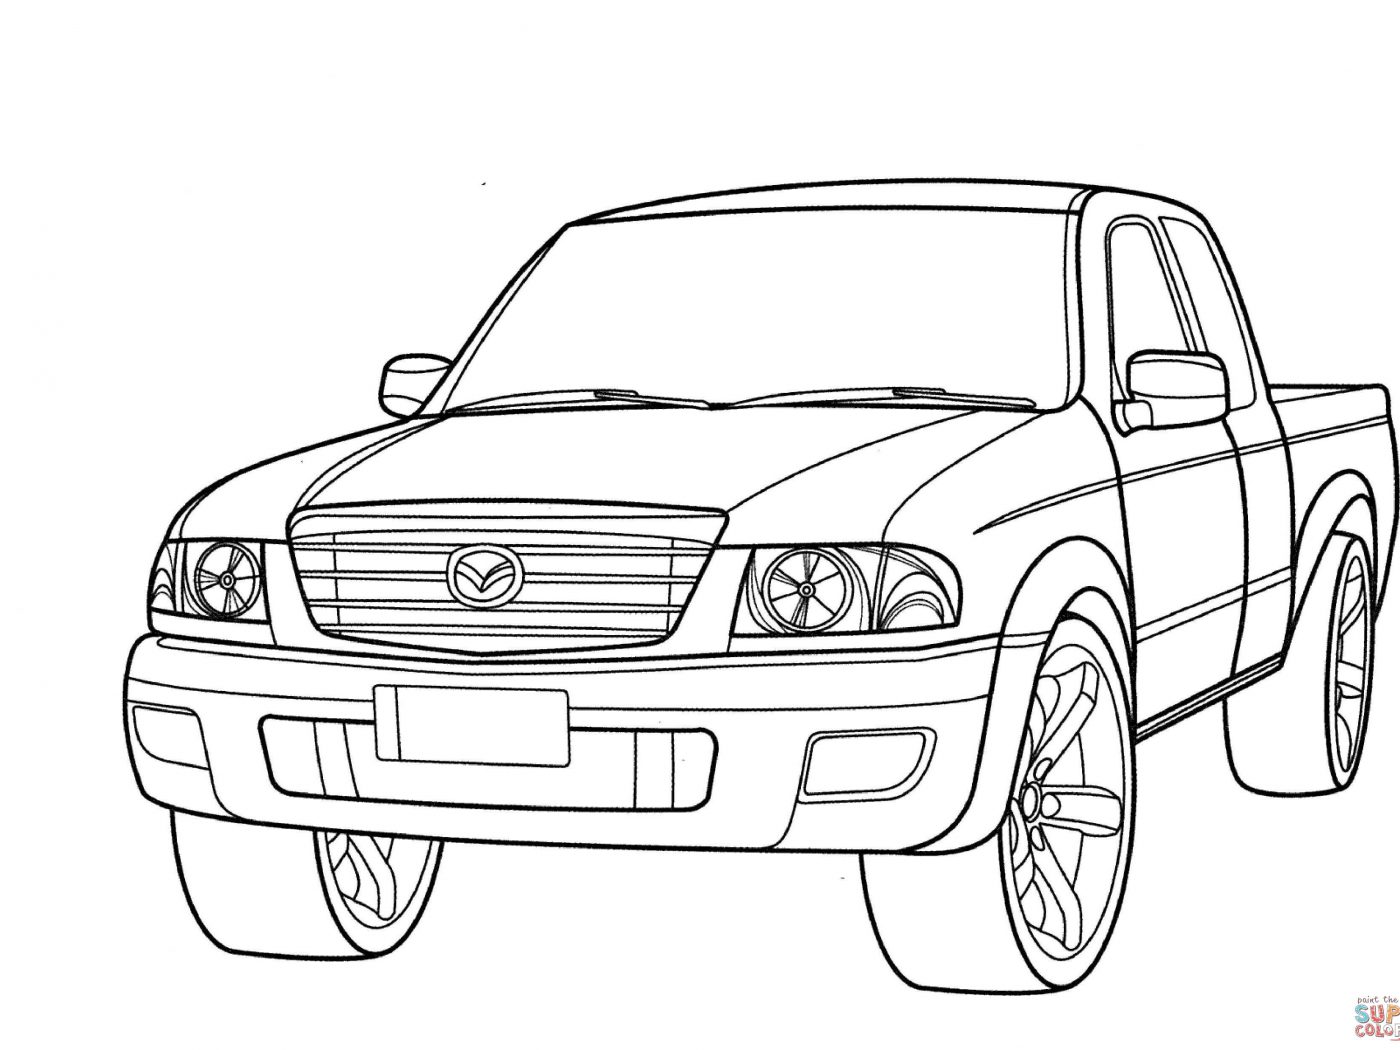 Gmc Truck Coloring Pages at GetColorings.com  Free printable colorings